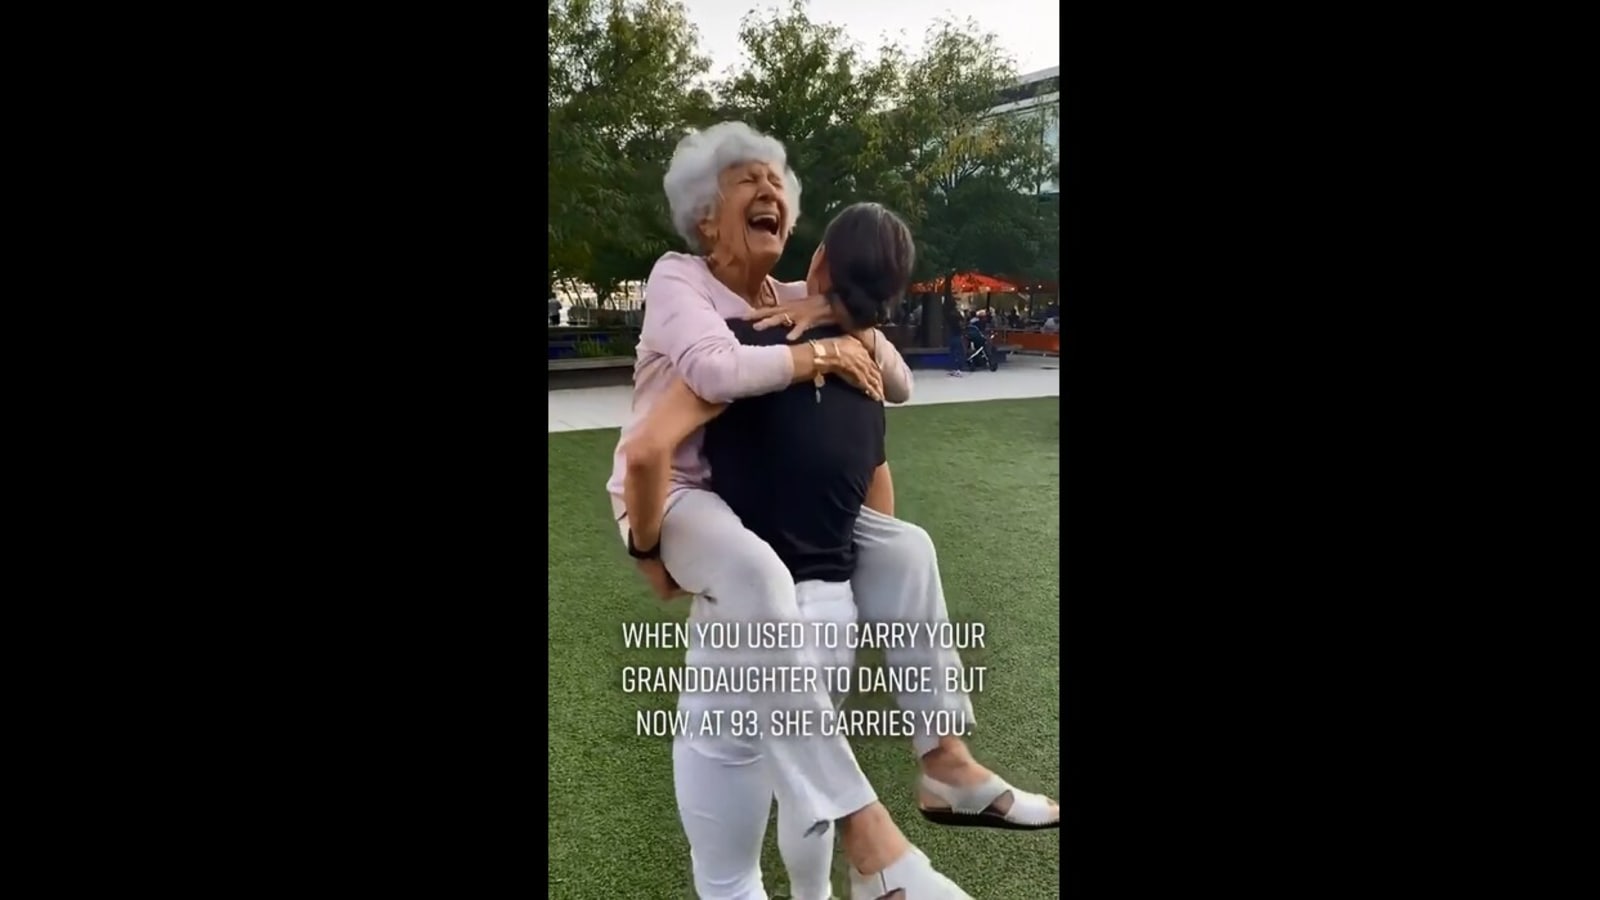 Woman Carries Grandma To Dance With Her 1631776257315 1631776270808.PNG